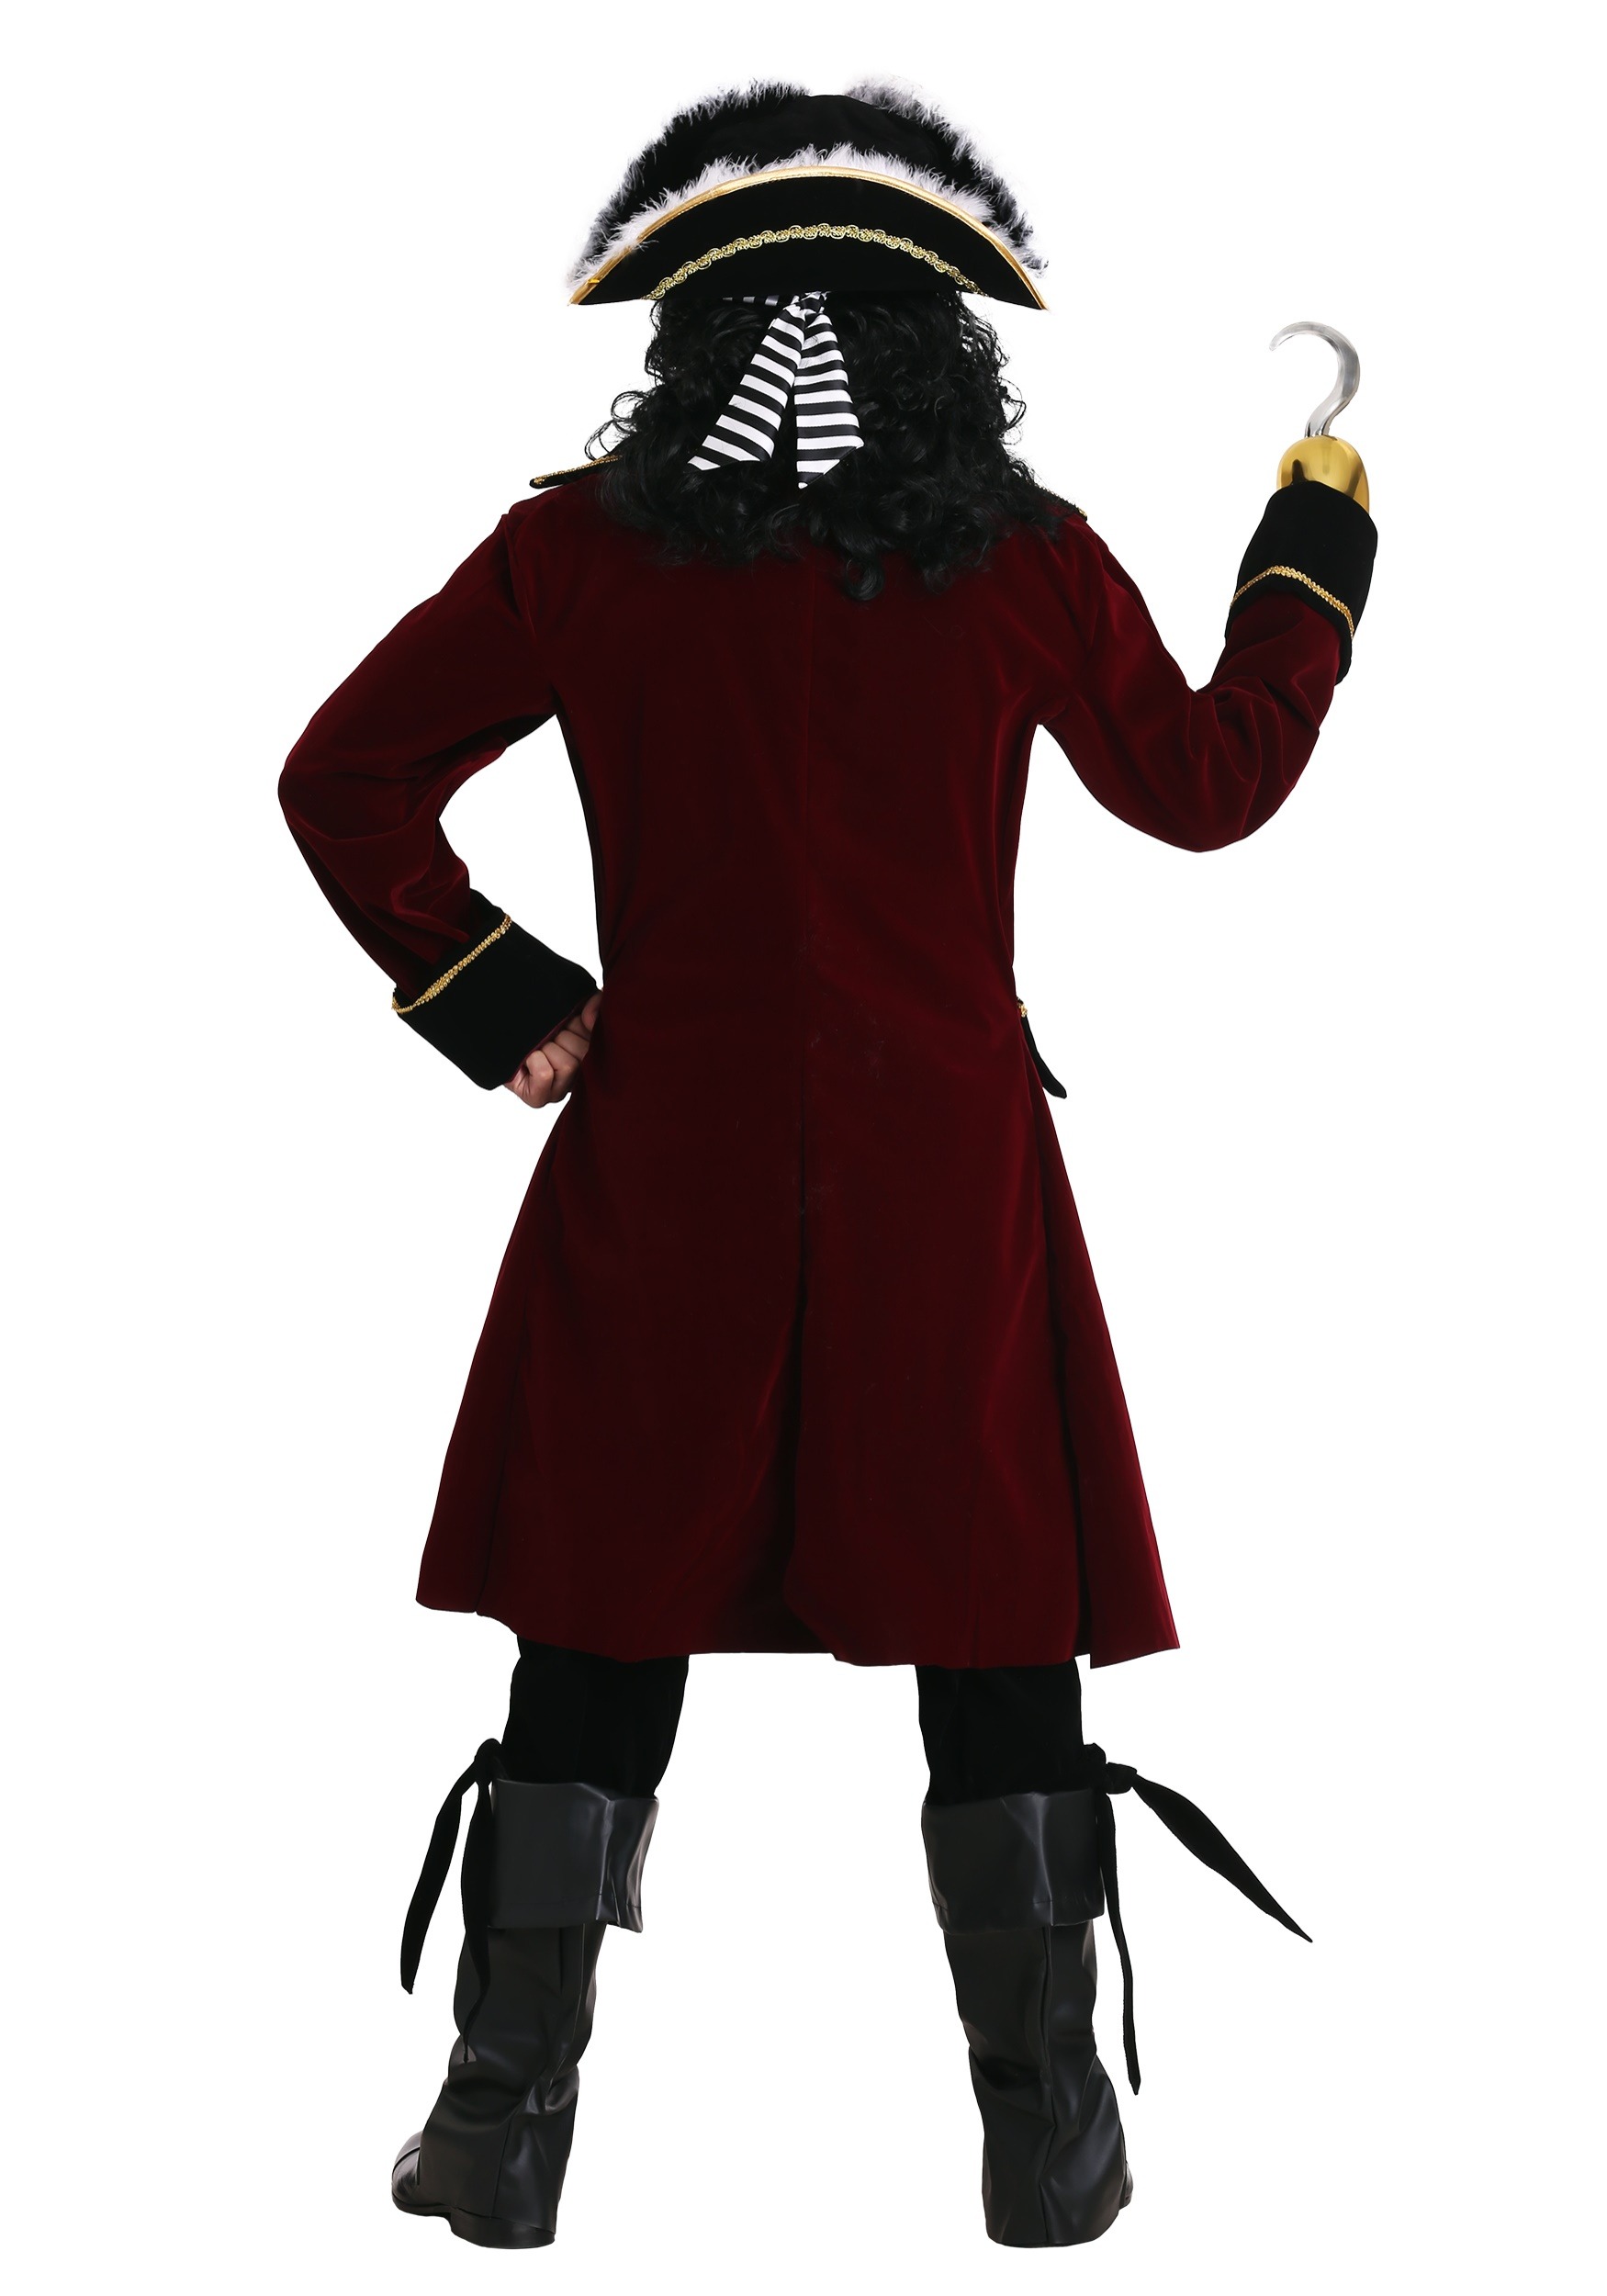 https://images.fun.com/products/5233/2-1-100508/deluxe-captain-hook-plus-size-costume-update1-back.jpg